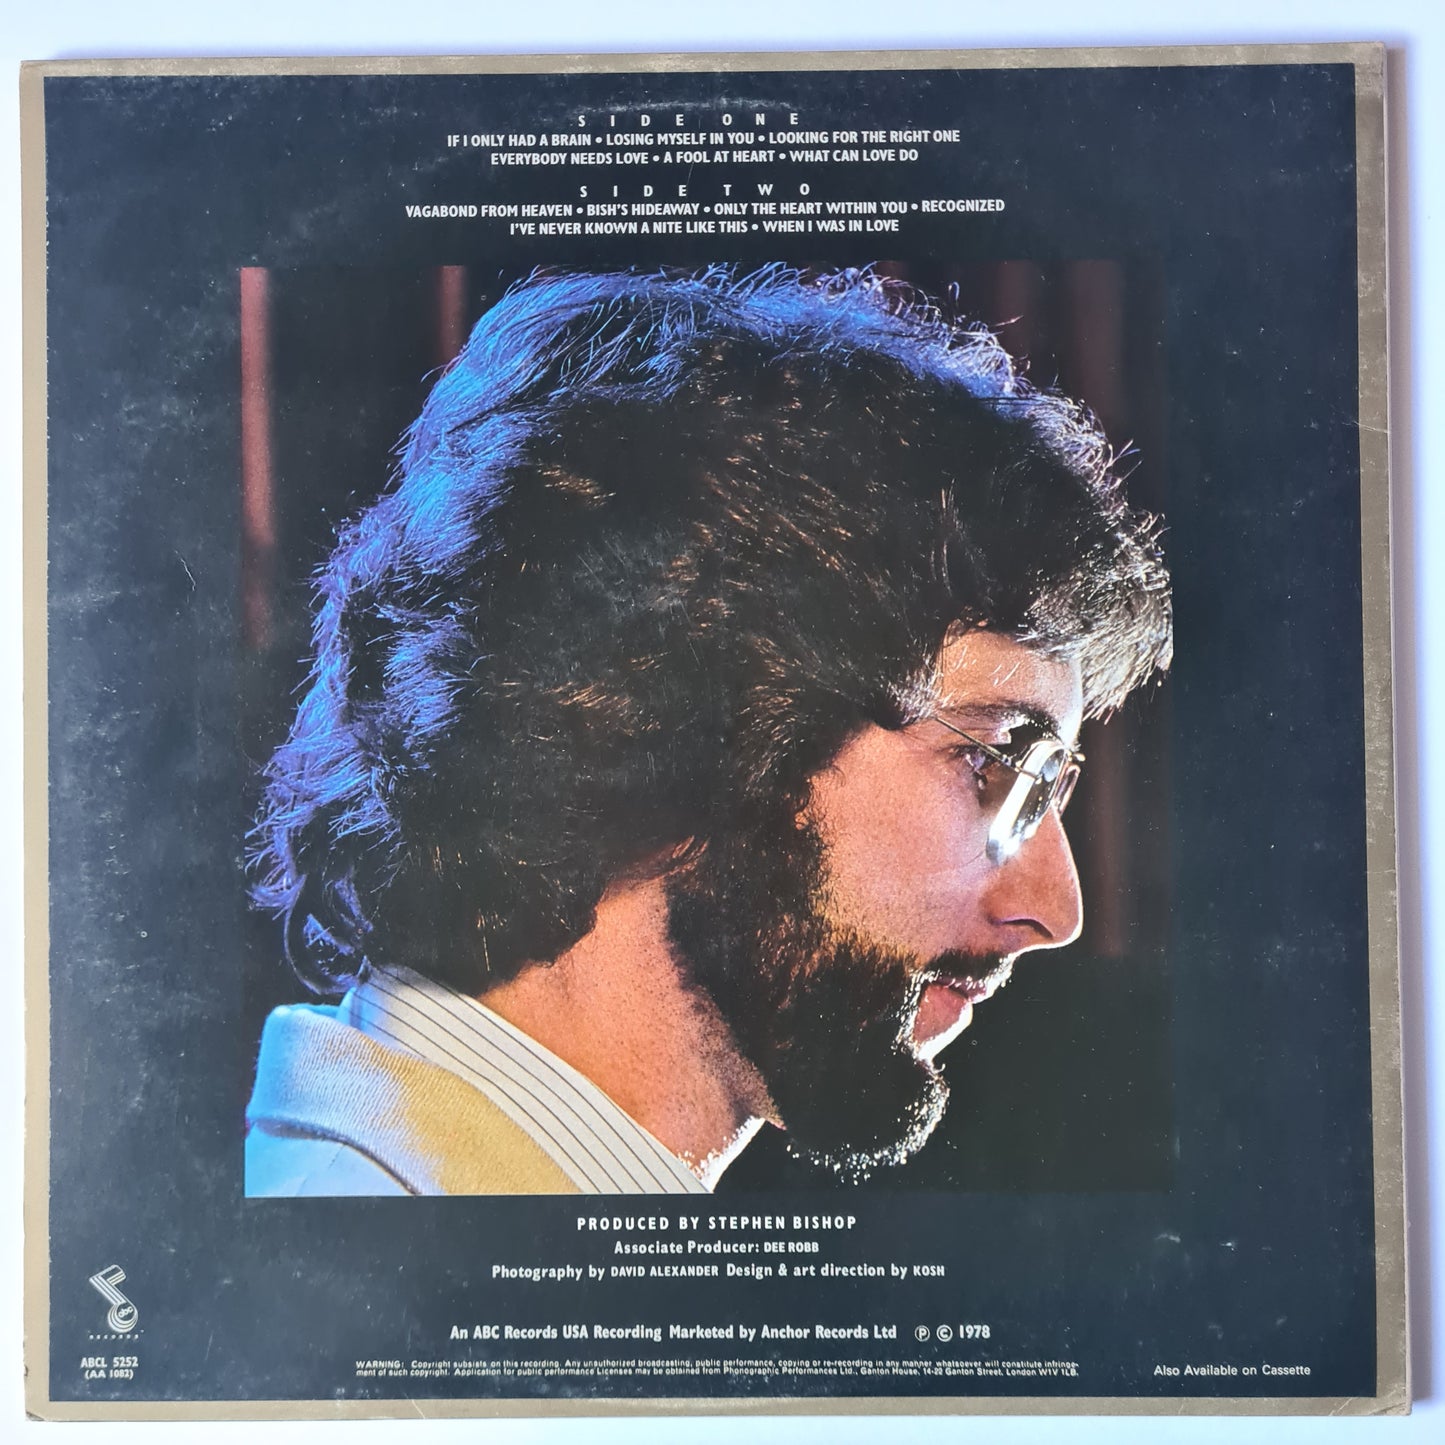 CLEARANCE STOCK! - STEPHEN BISHOP - VINYL RECORD